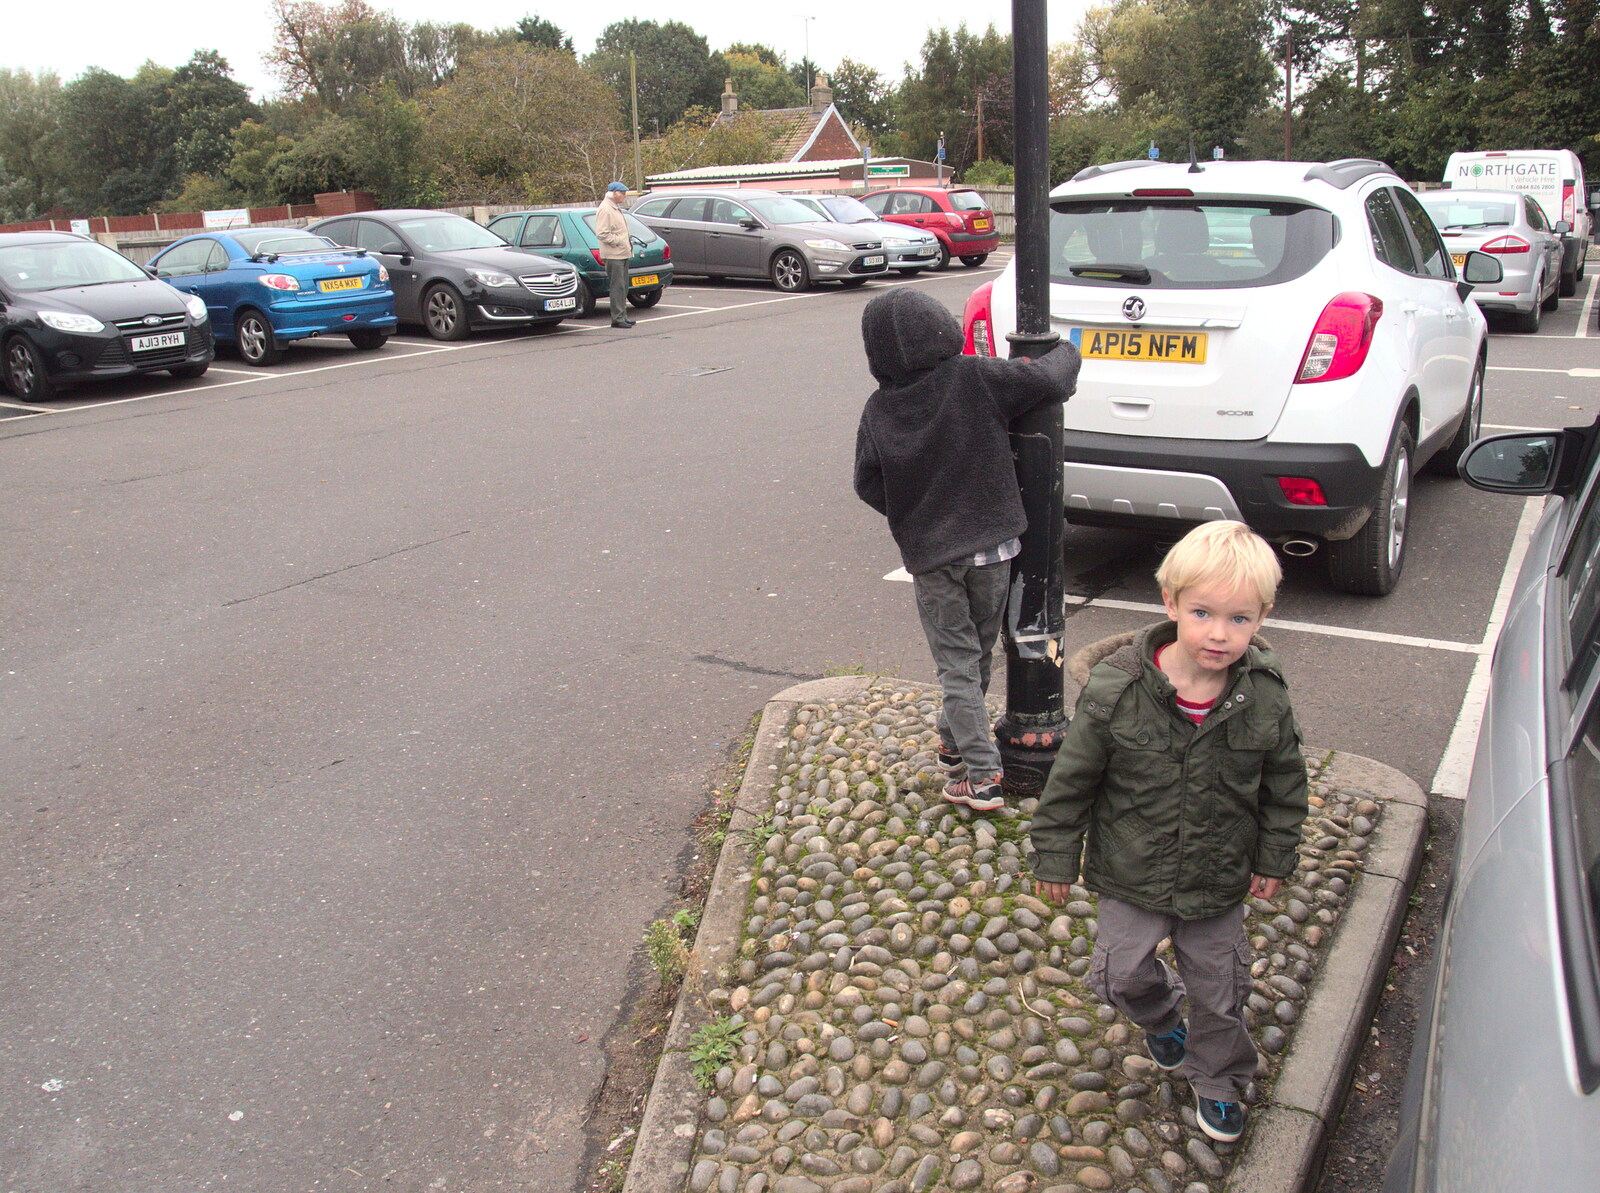 Harry roams around in Chapel Street car park from Fred's Gyrobot, Brome, Suffolk - 18th October 2015